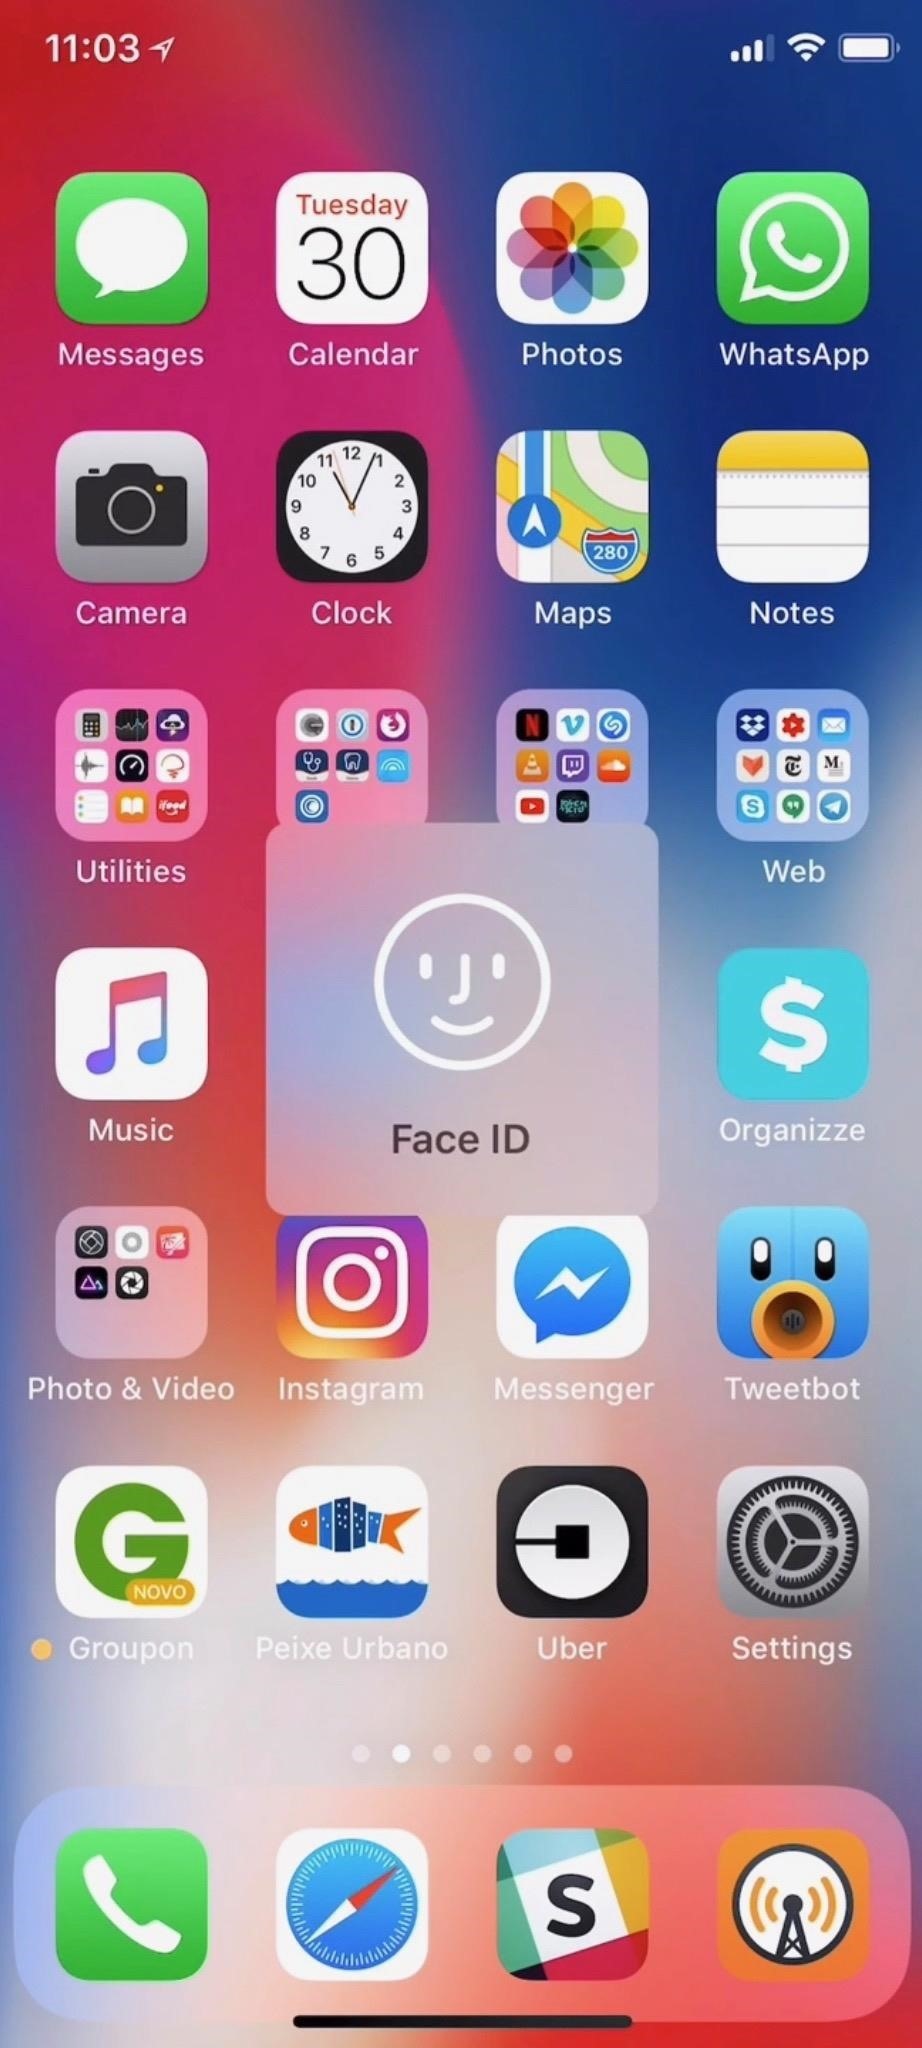 How to Use Face ID on iPhone X to Approve Family Sharing Download Requests